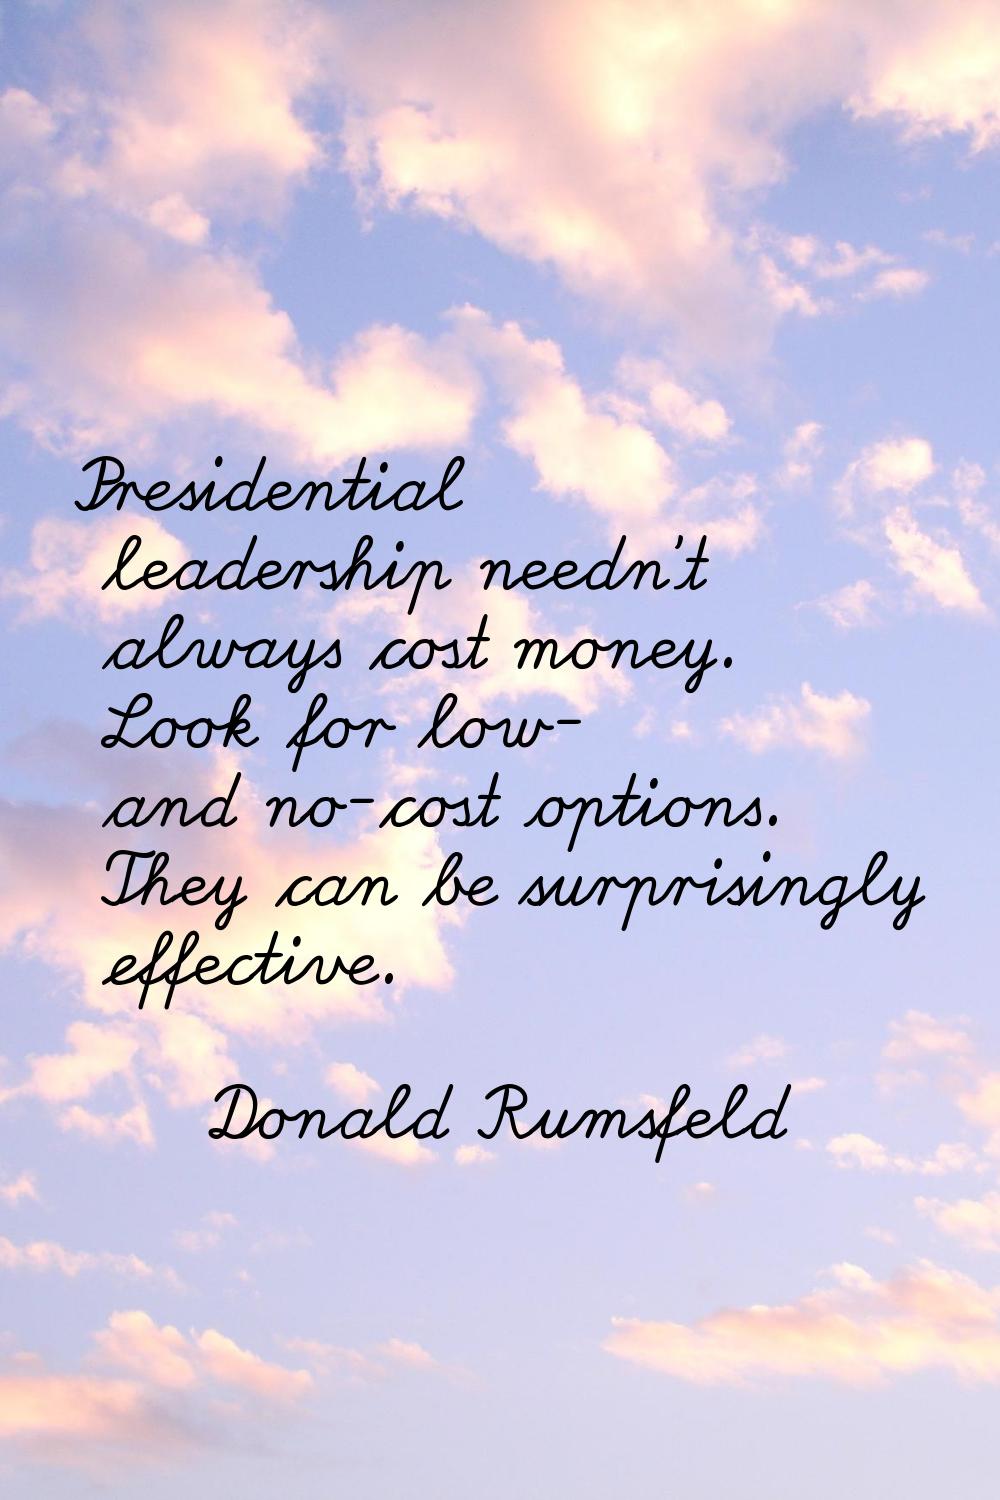 Presidential leadership needn't always cost money. Look for low- and no-cost options. They can be s